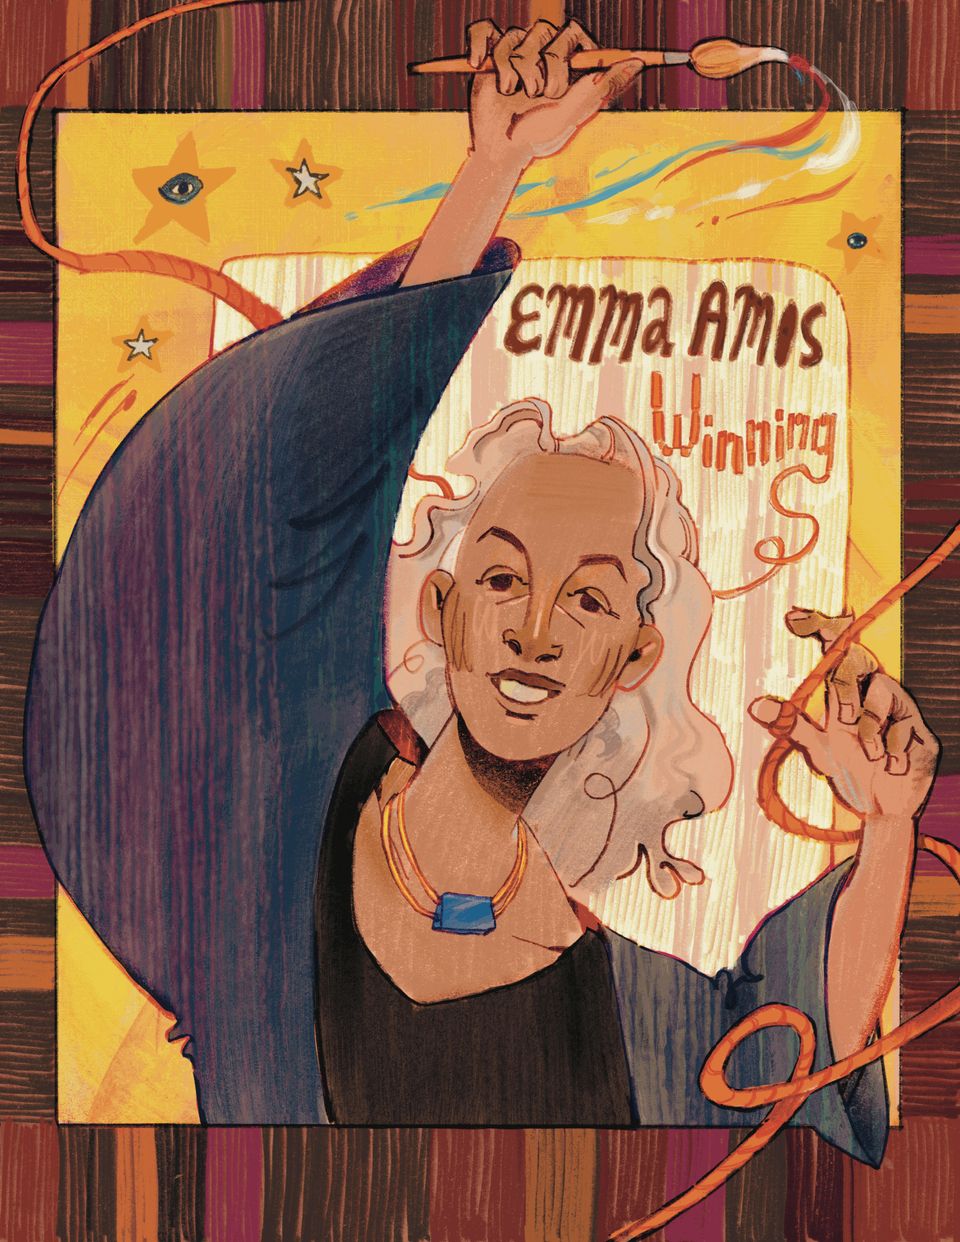 Emma Amos stands centrally, holding yarn and a paint brush, surrounded by a woven background. Text reads: "Emma Amos: Winning."